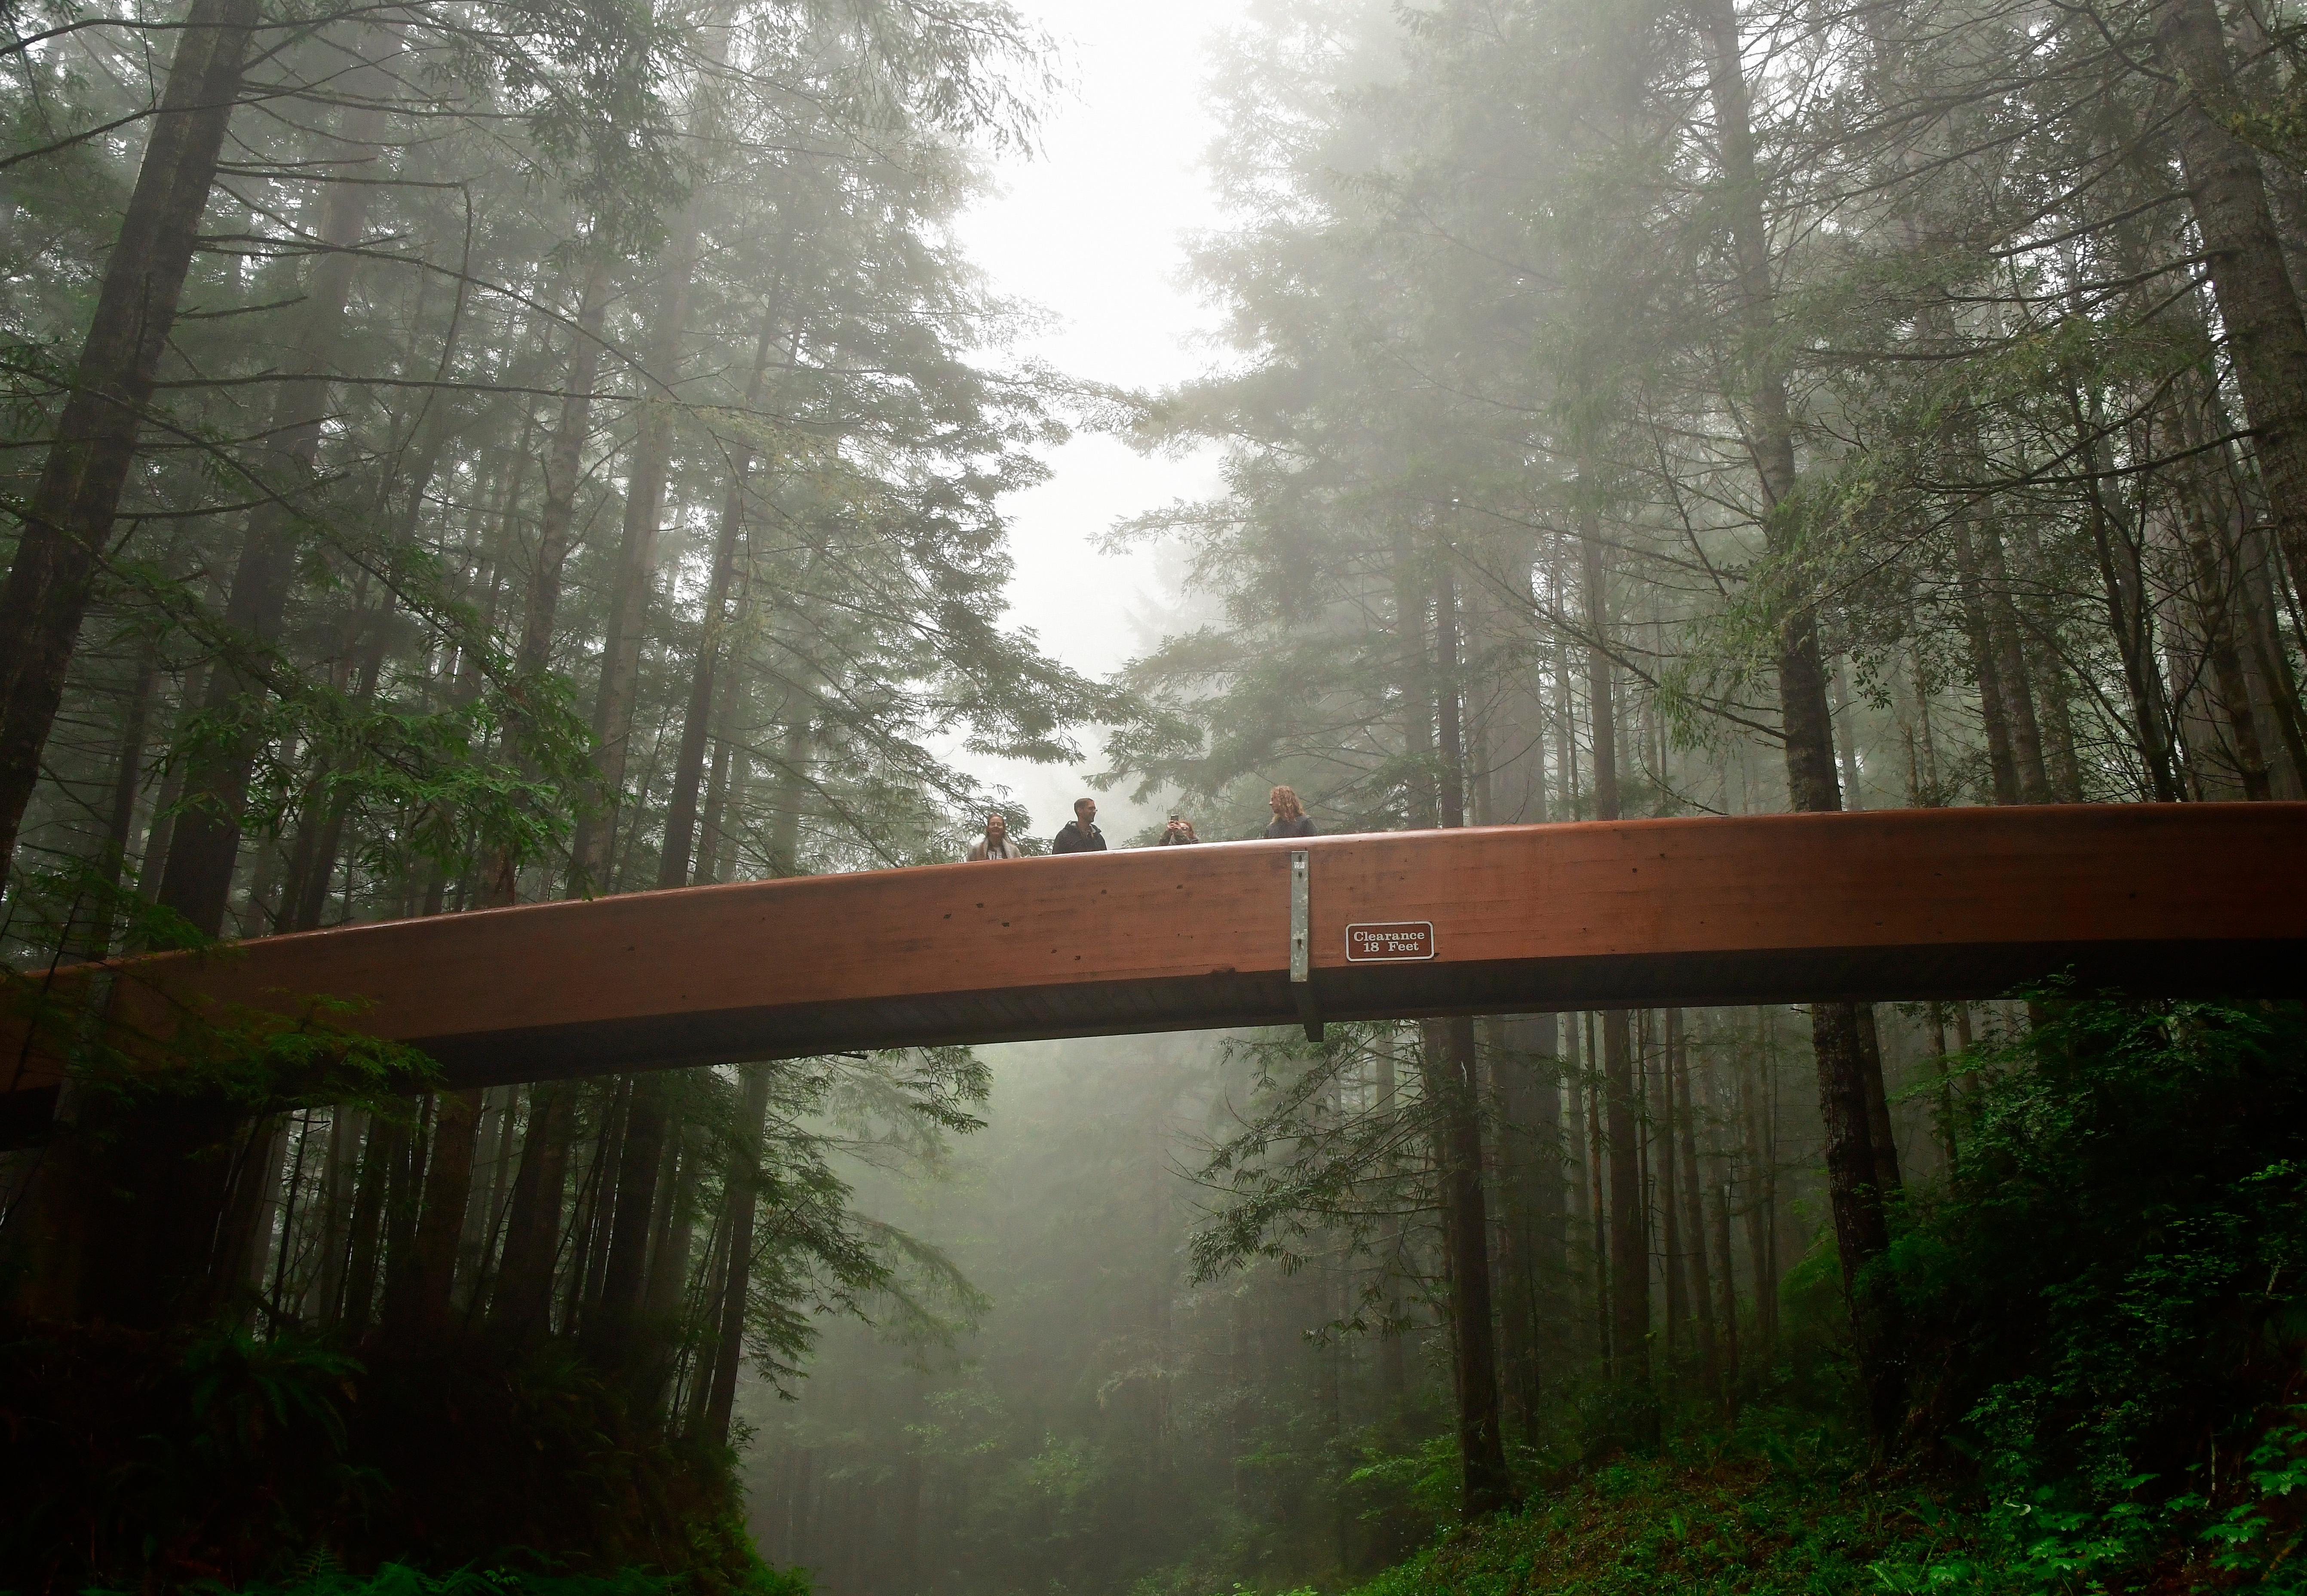 A footbridge with people crosses a road on a foggy day